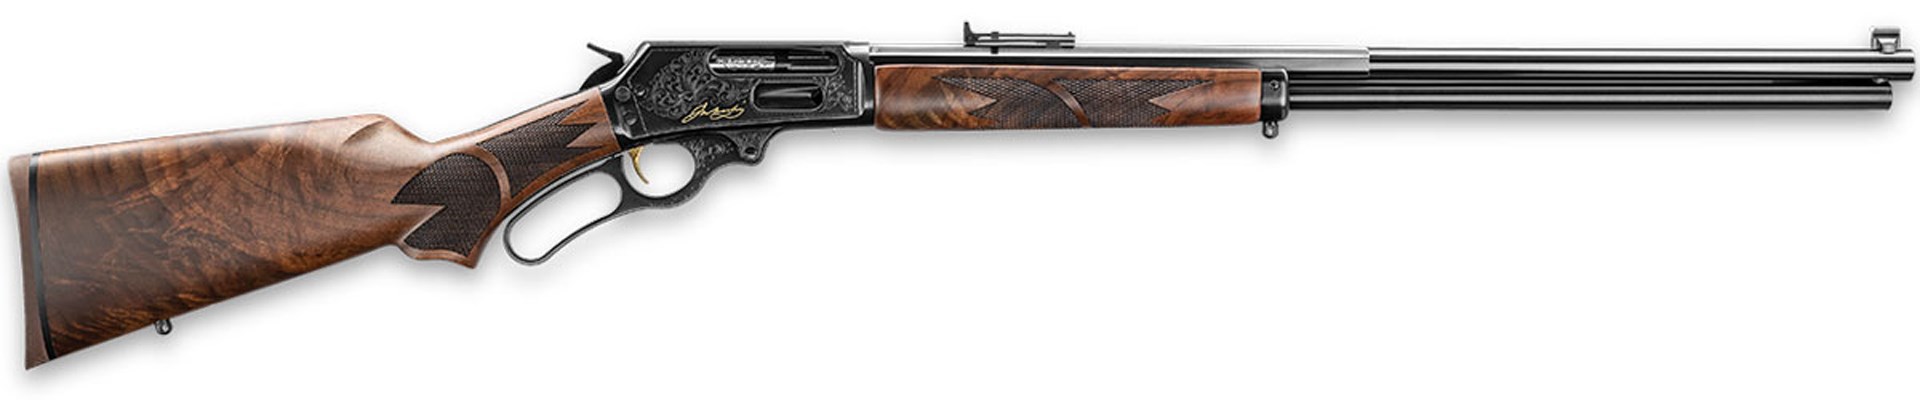 150th anniversary edition marlin lever-action rifle right-side view figured walnut deep bluing gold inlay engraving